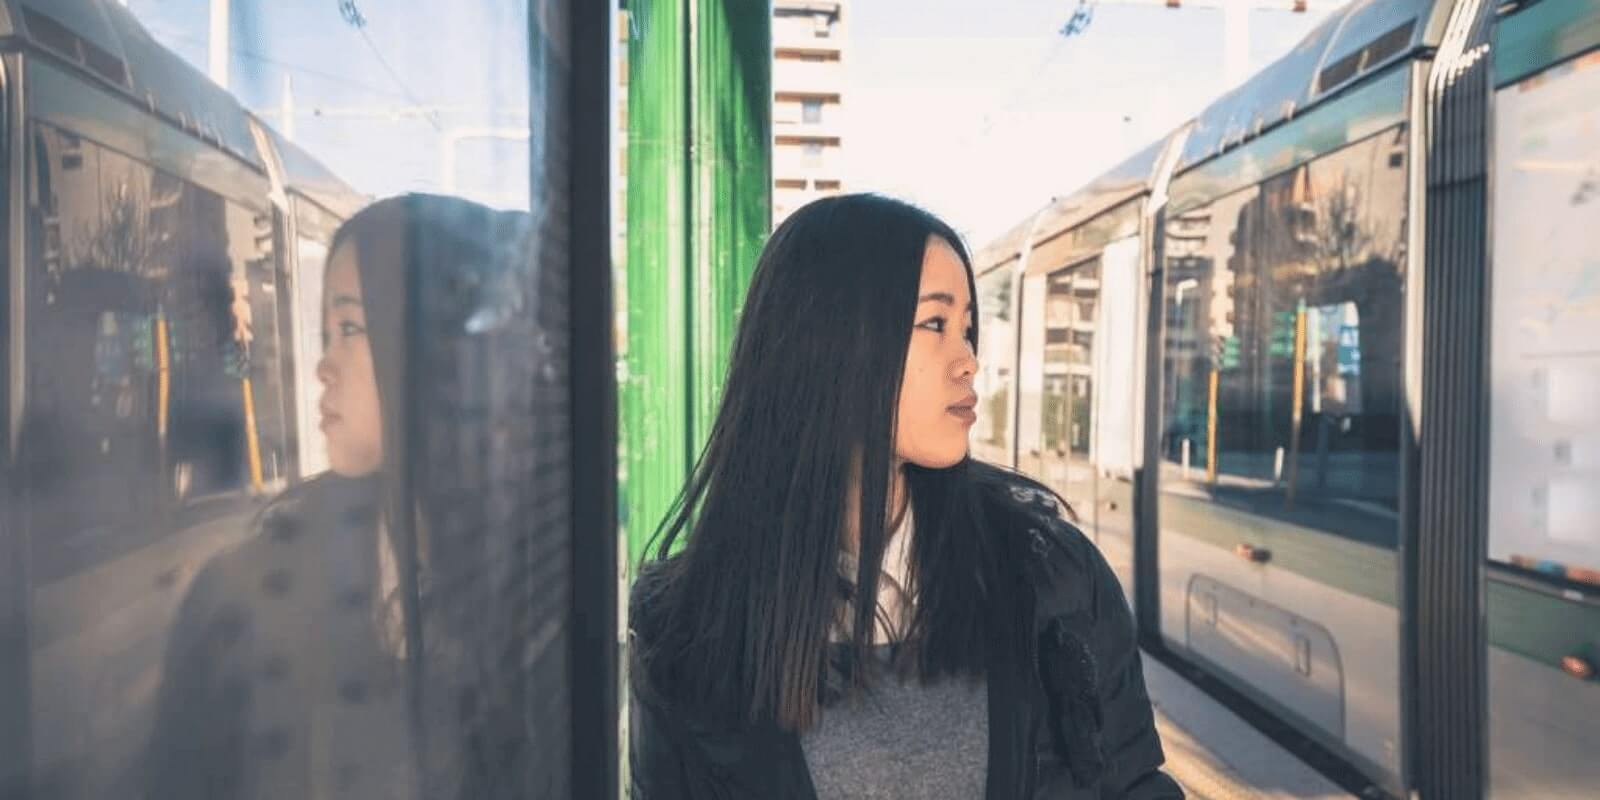 A teen girl staring at the train in the train station